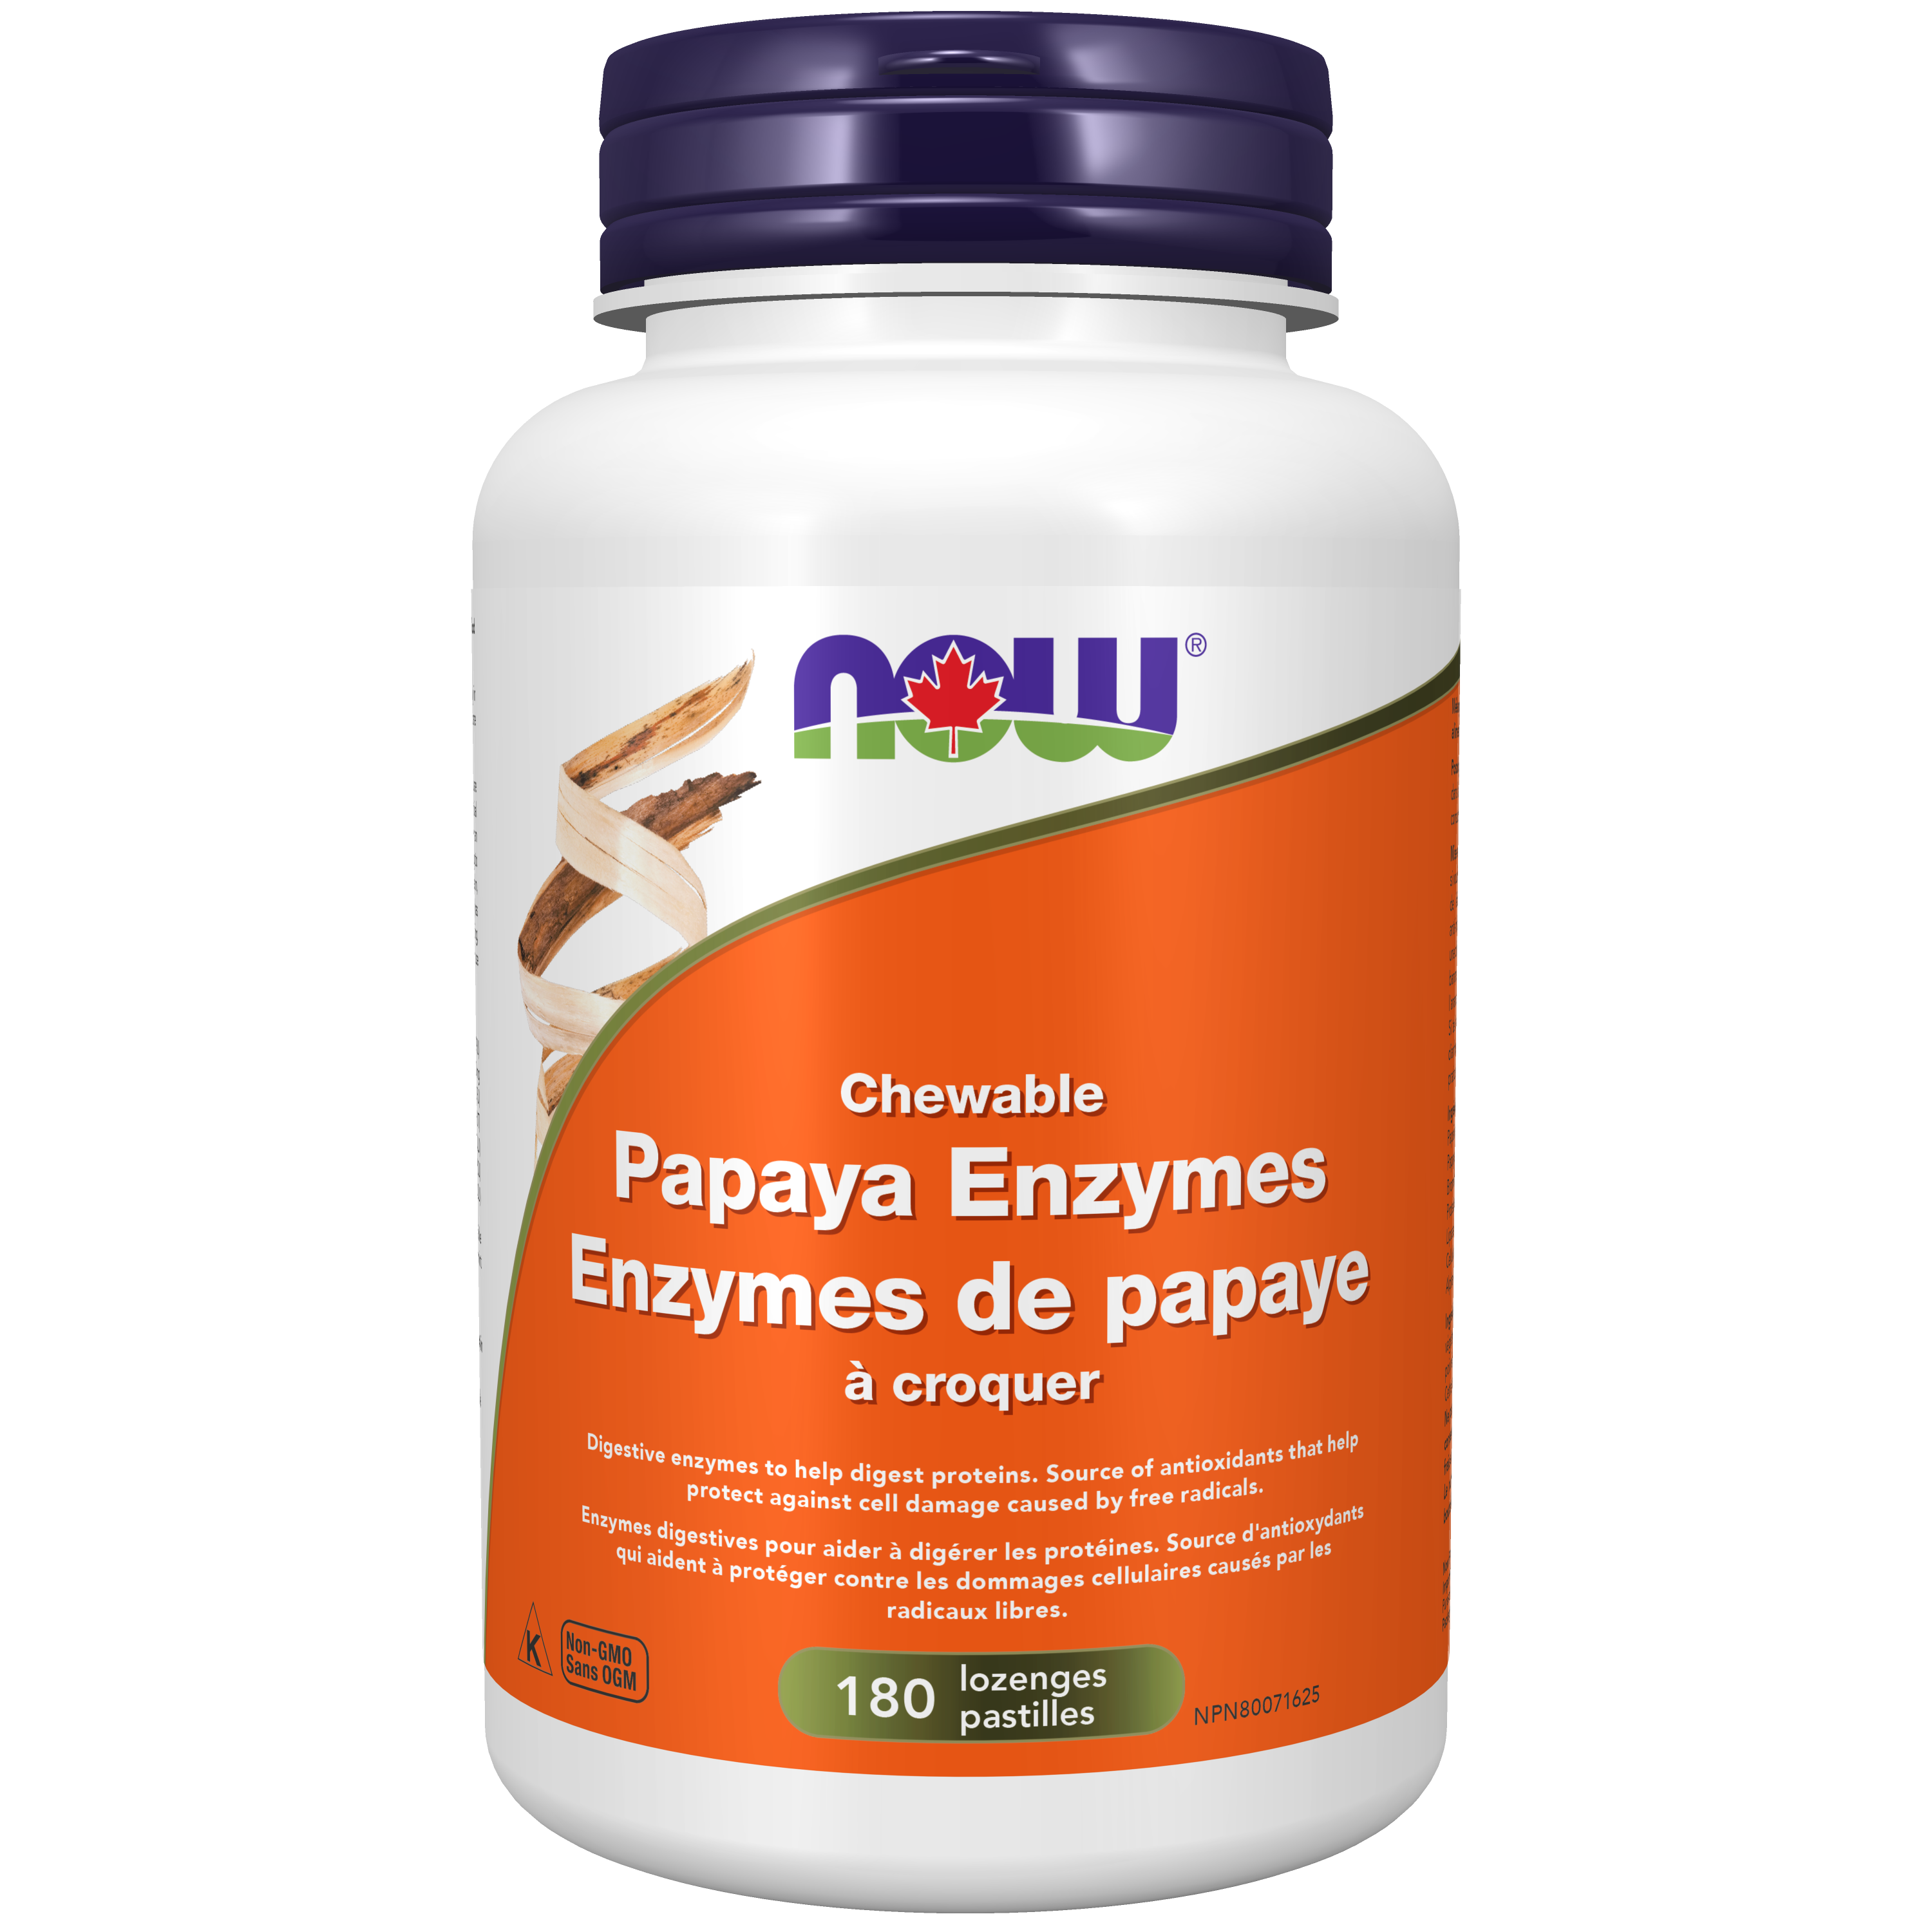 Digestive enzyme supplement